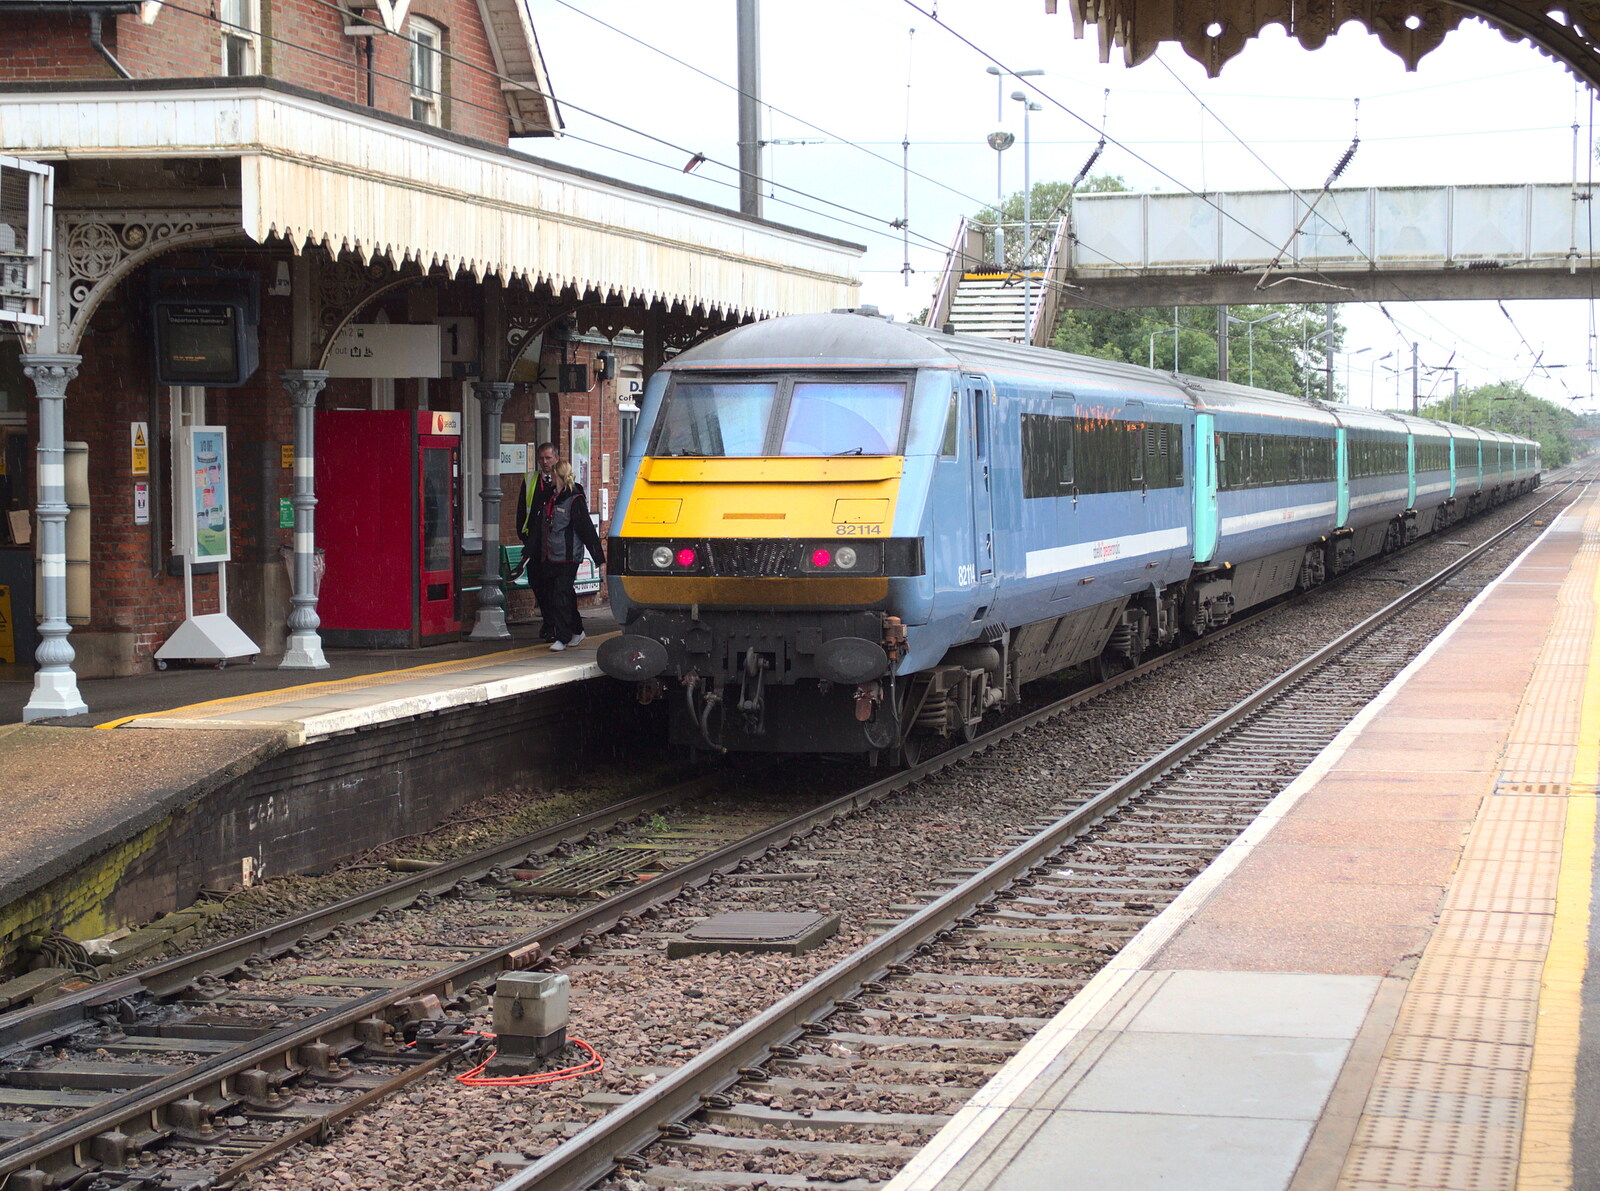 A rake of Mark 3 coaches and a DVT at Diss station from A Trip to Pizza Pub, Great Suffolk Street, Southwark - 8th July 2014